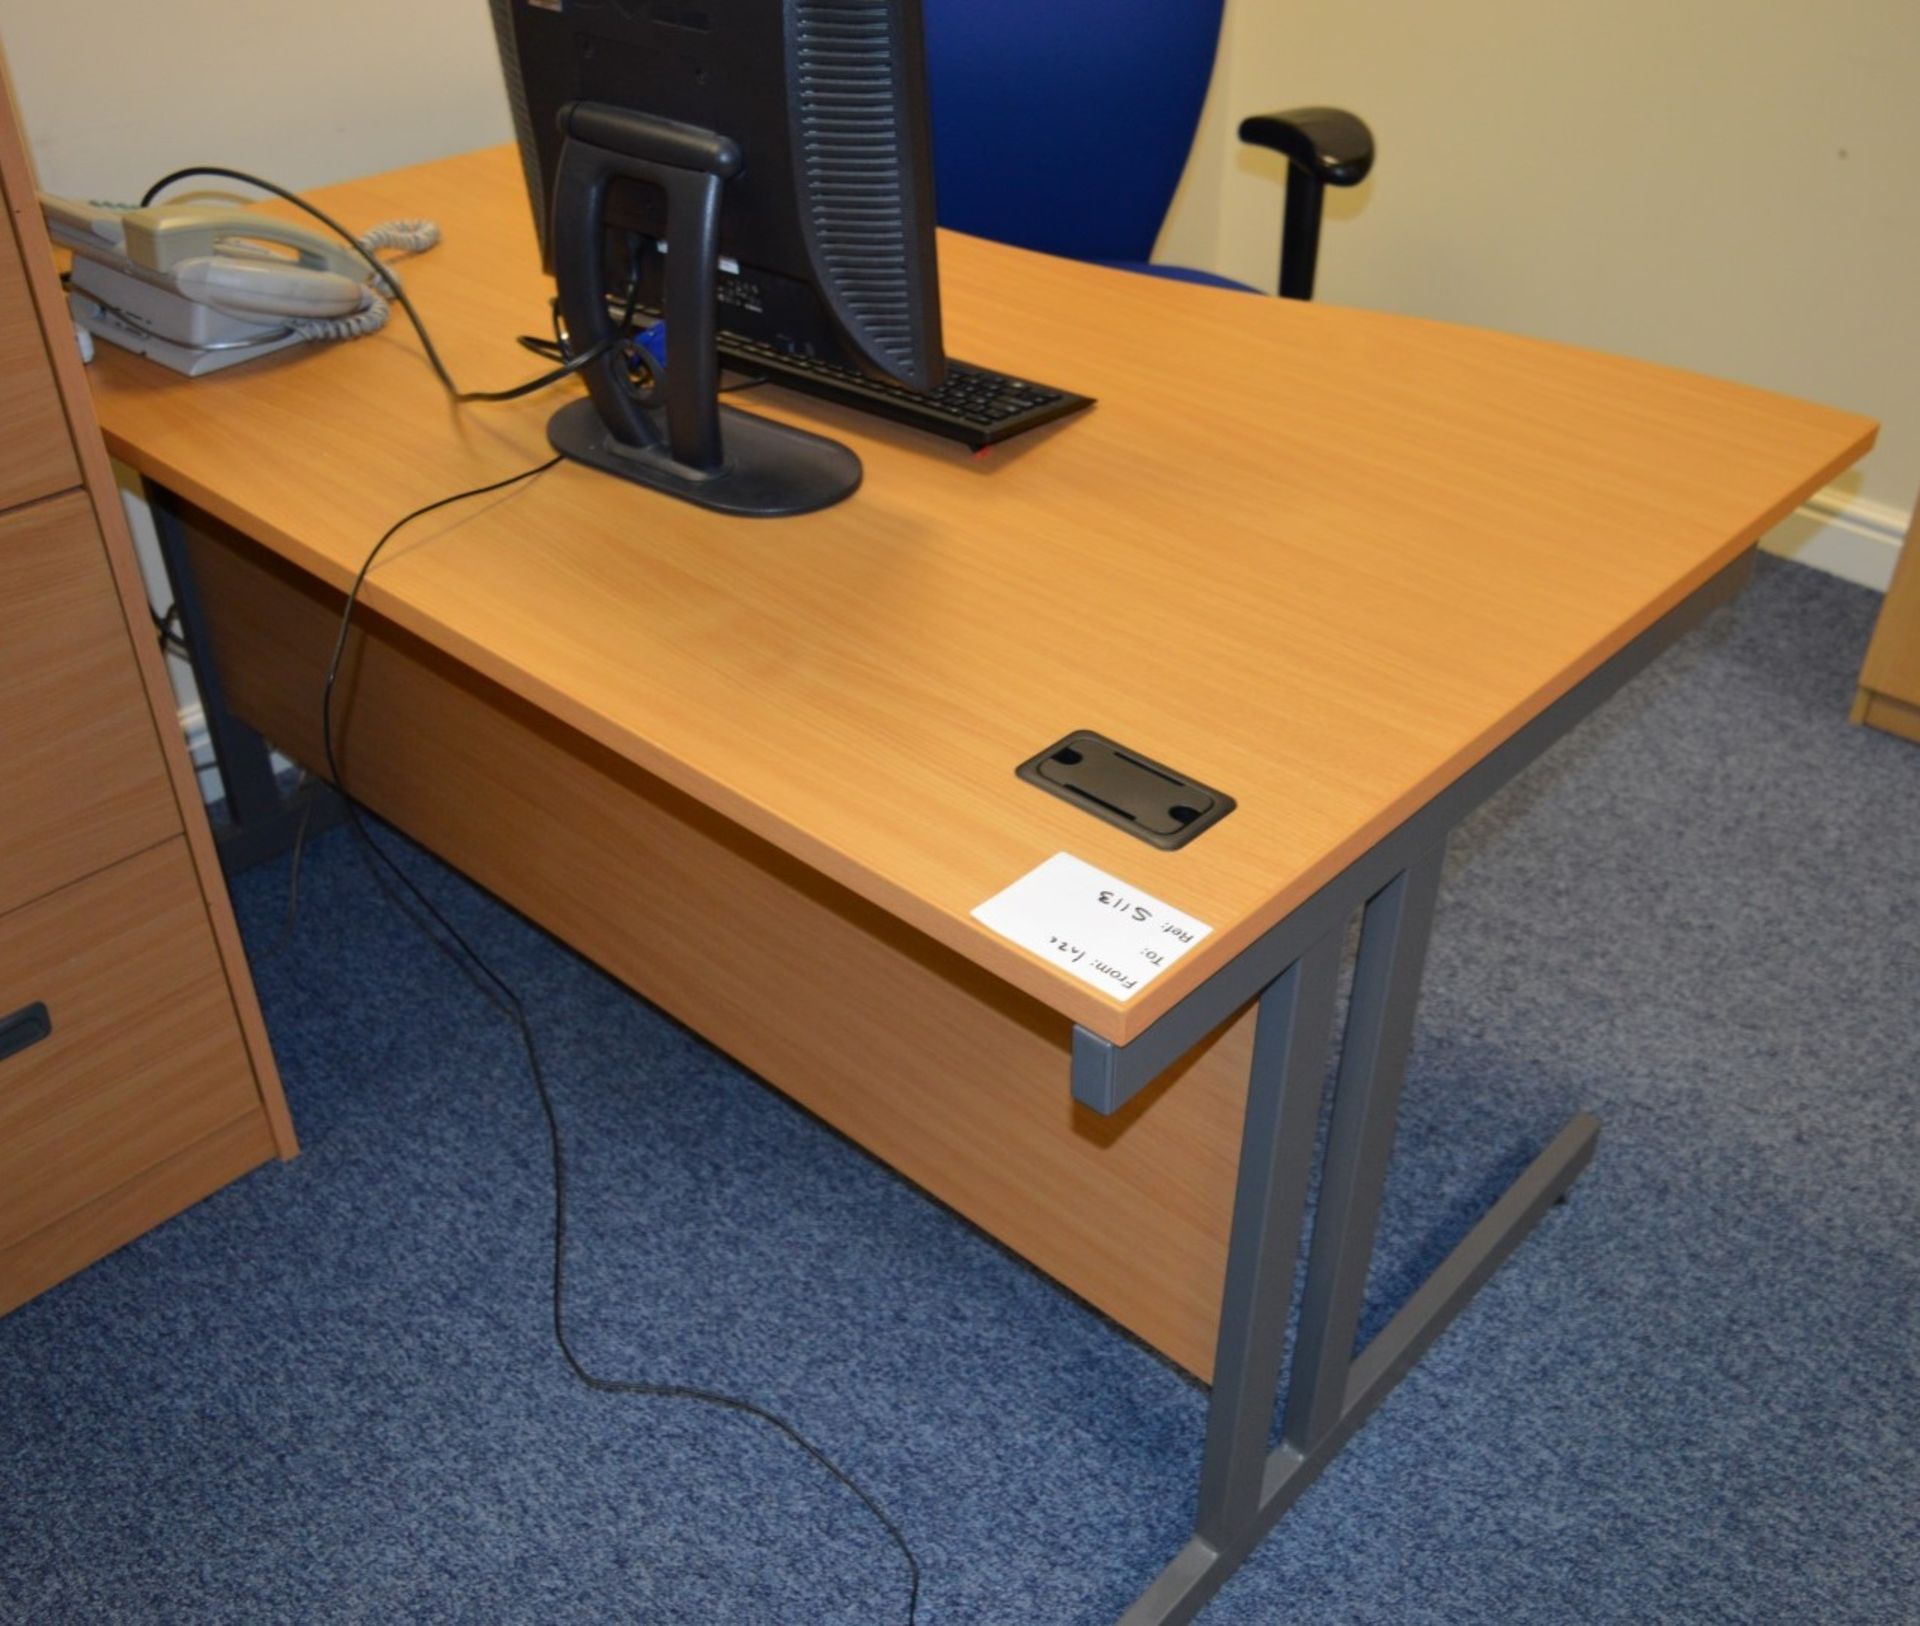 1 x Office Desk With Beech Top, Grey Coated Steel Frame and Blue Office Swivel Chair - H72 x W140 - Image 4 of 4